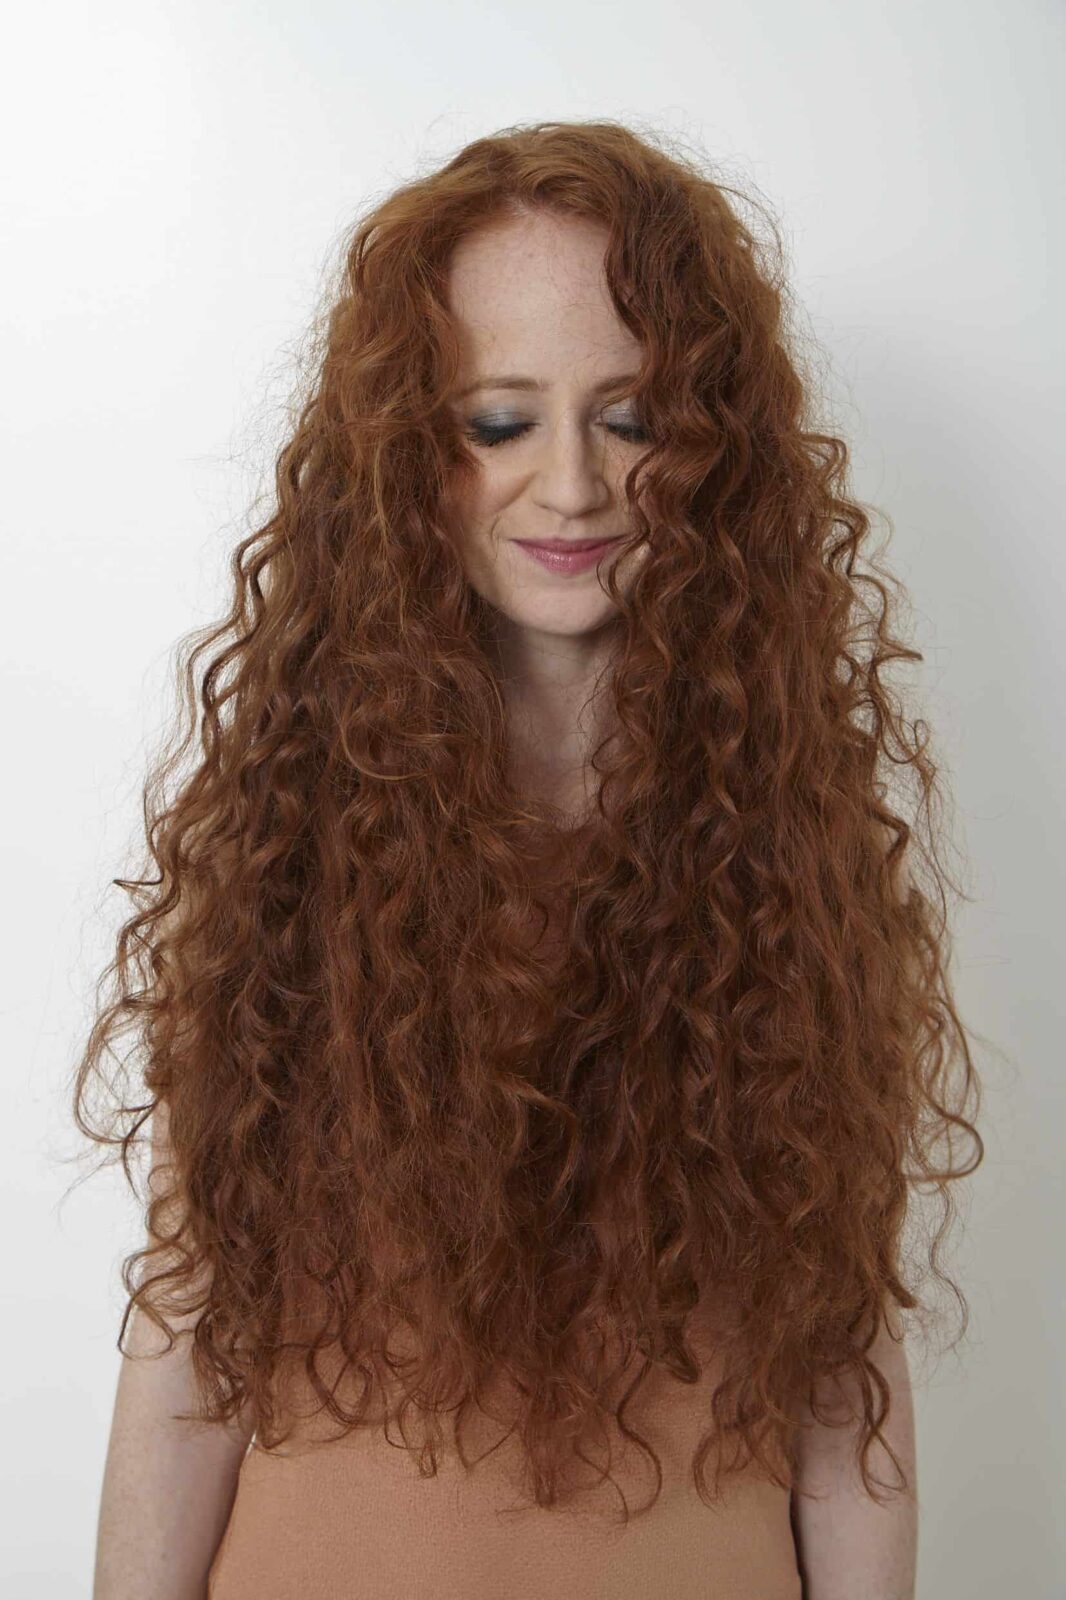 4 Easy Ways to Care for Your Curly Red Hair - Redhead Beauty